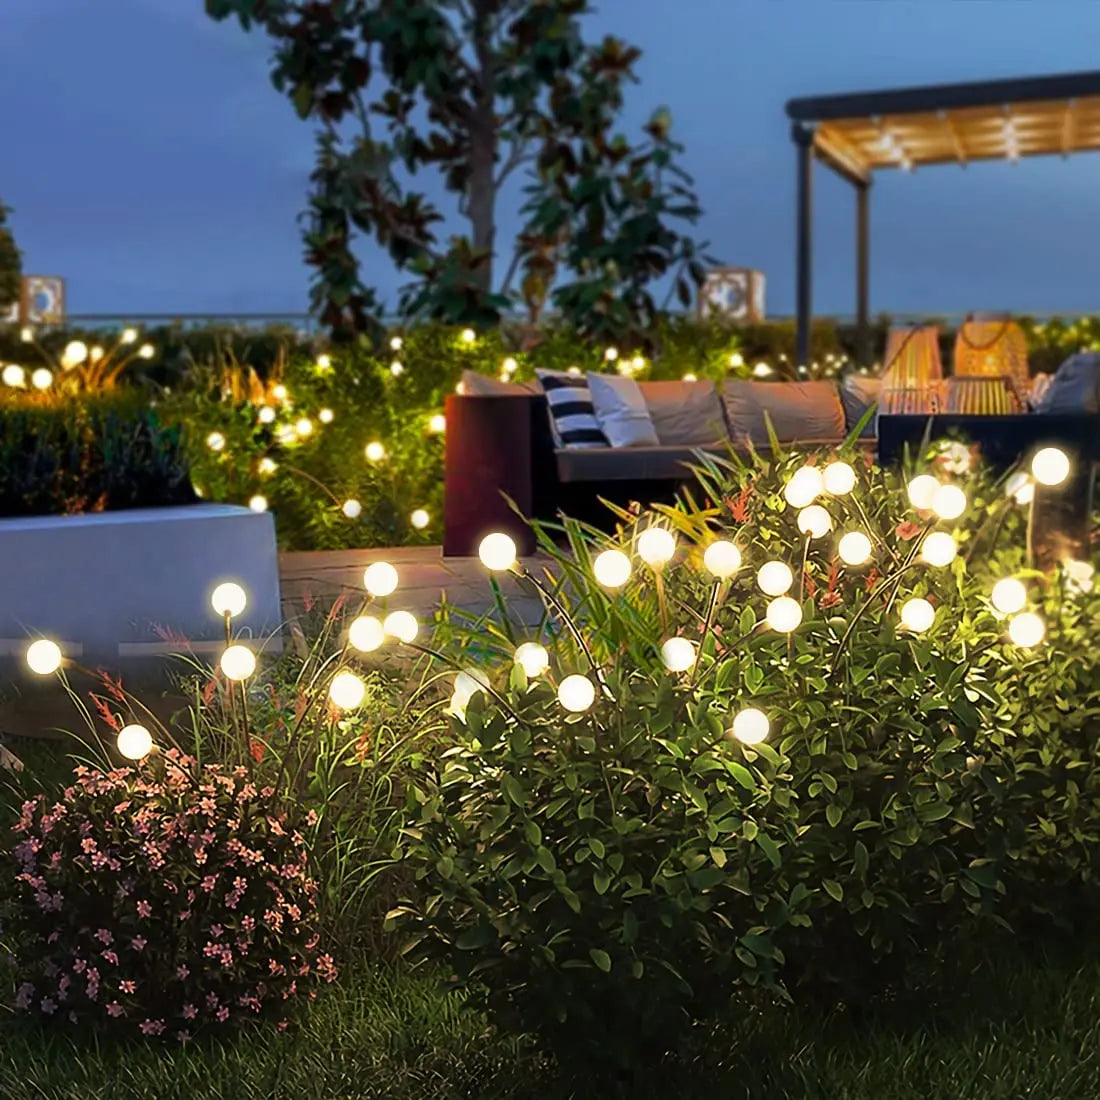 8 LED Solar Garden Lights Powered Firefly Lights Outdoor Waterproof Vibrant Garden Lights for Patio Pathway Decoration,Warm